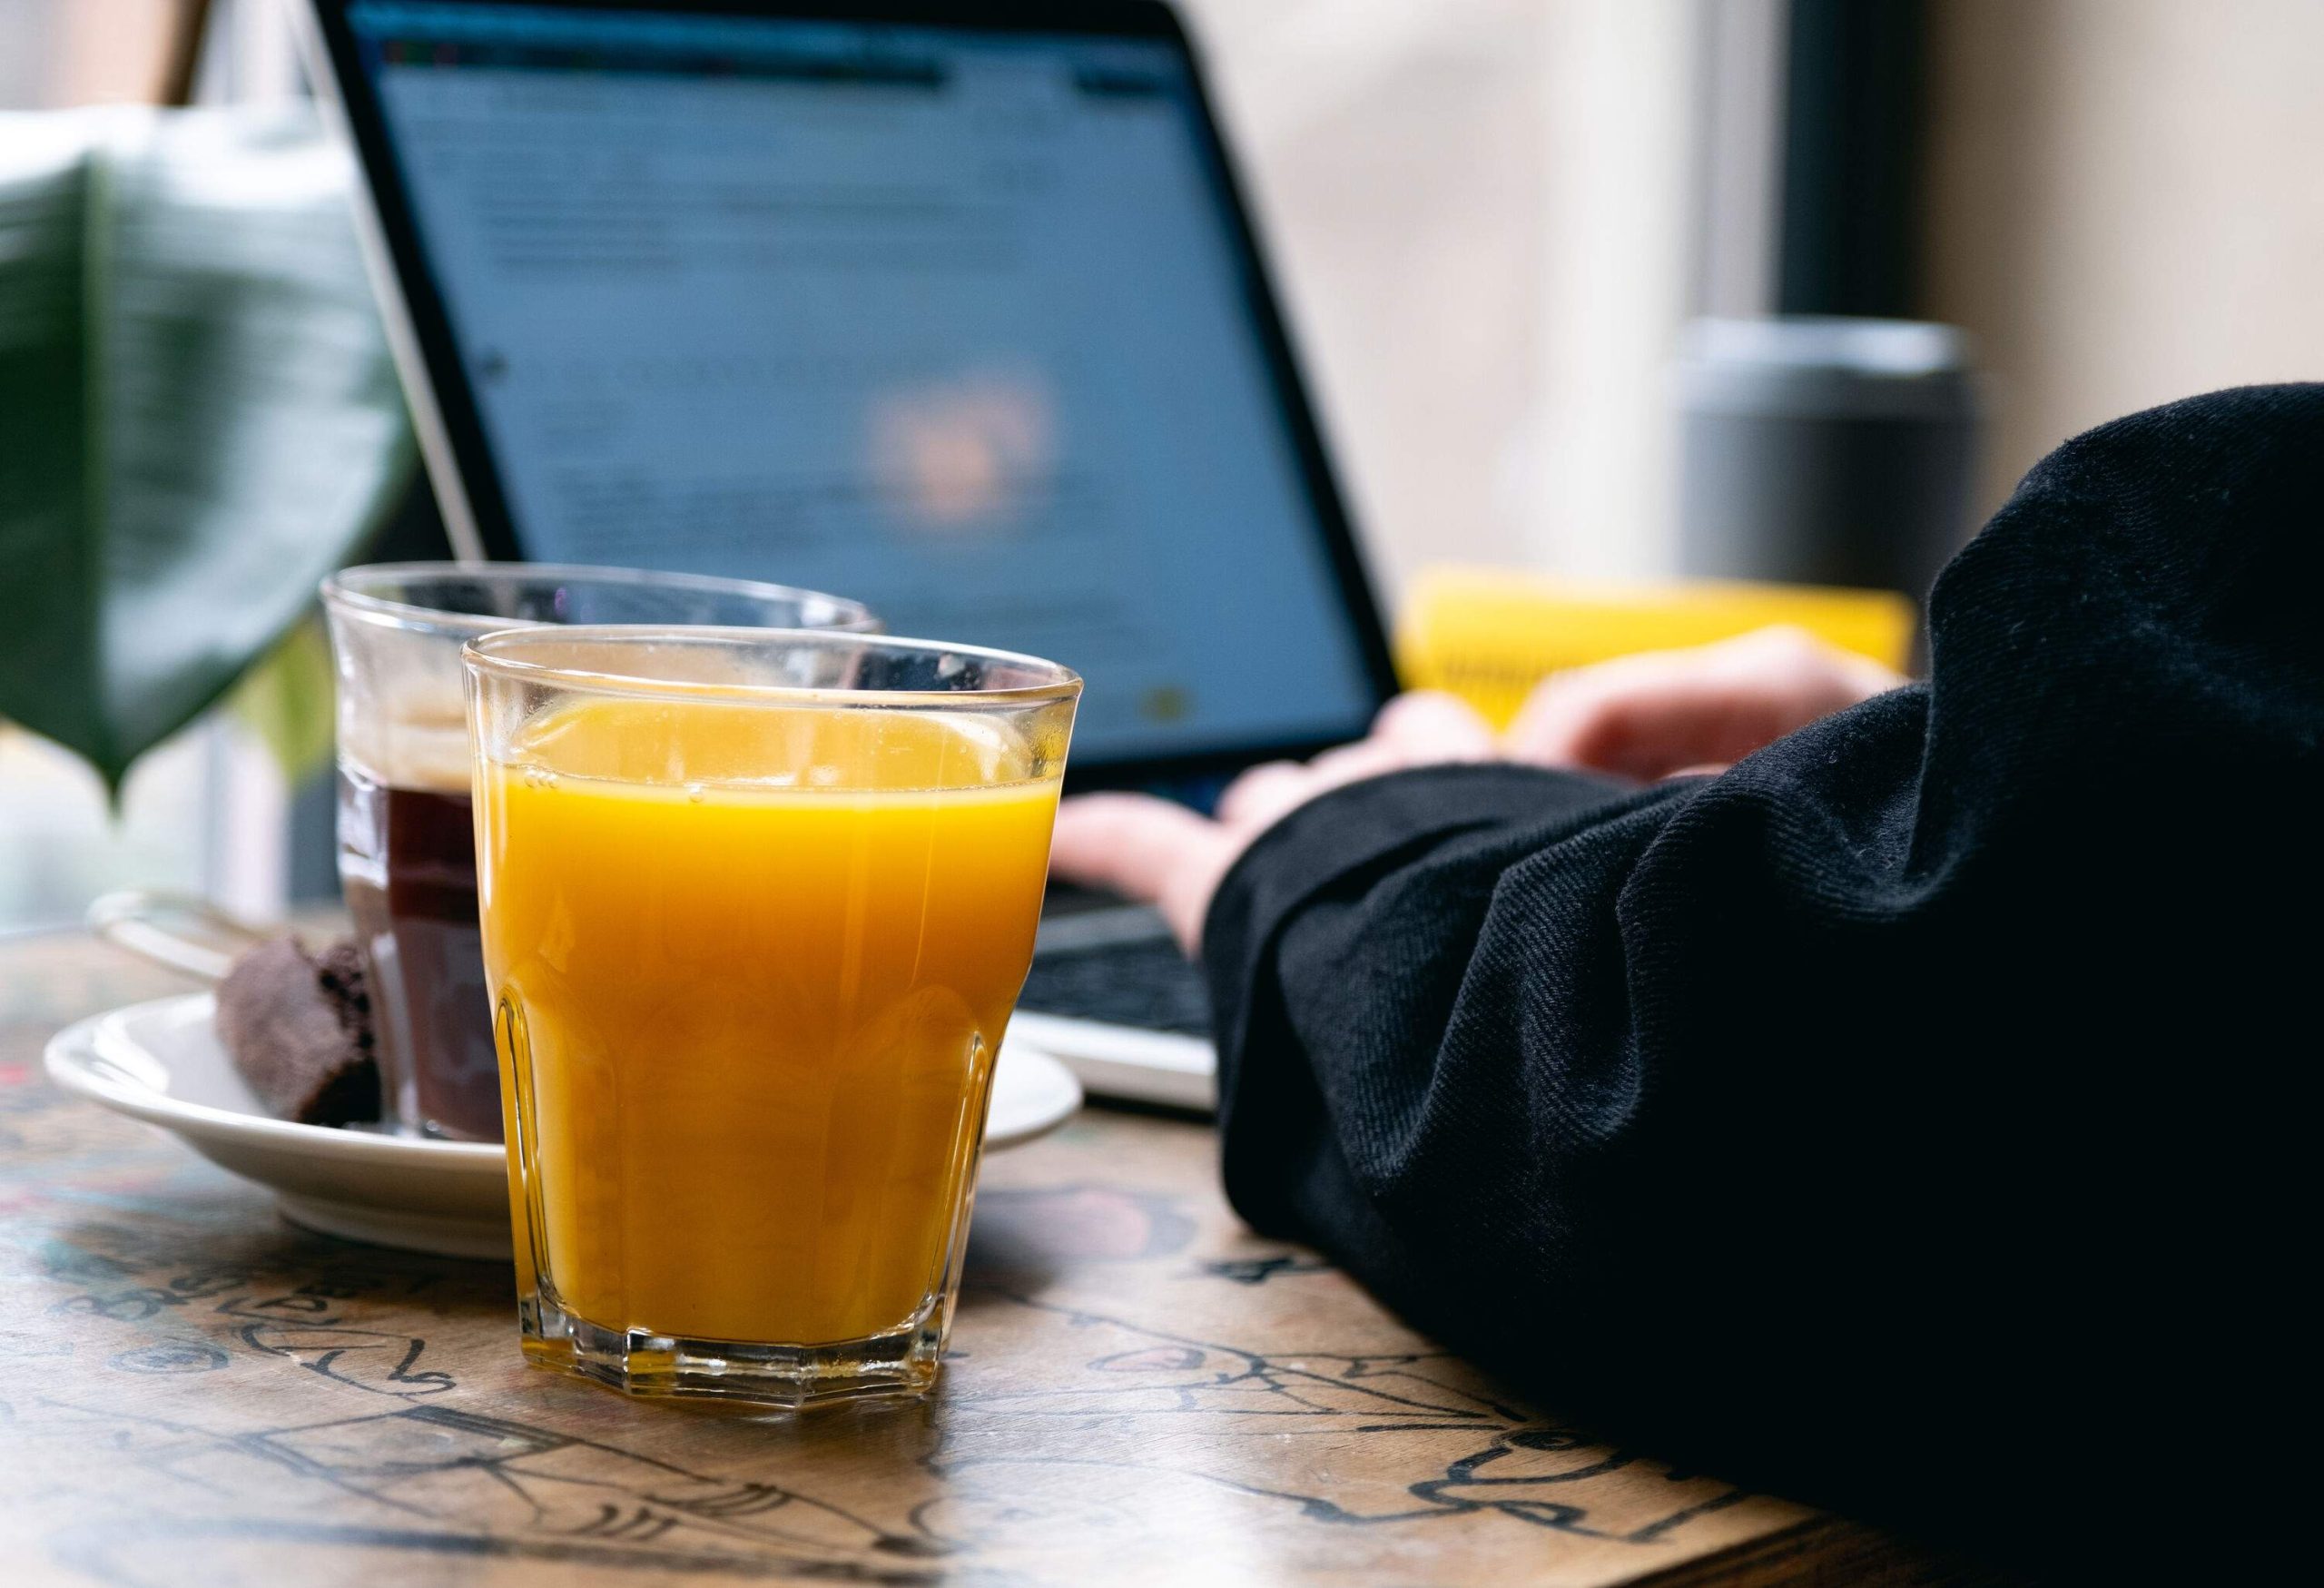 Focusing intently on their laptop, a person works diligently while a steaming mug of black coffee and a refreshing glass of orange juice sit nearby on the table.